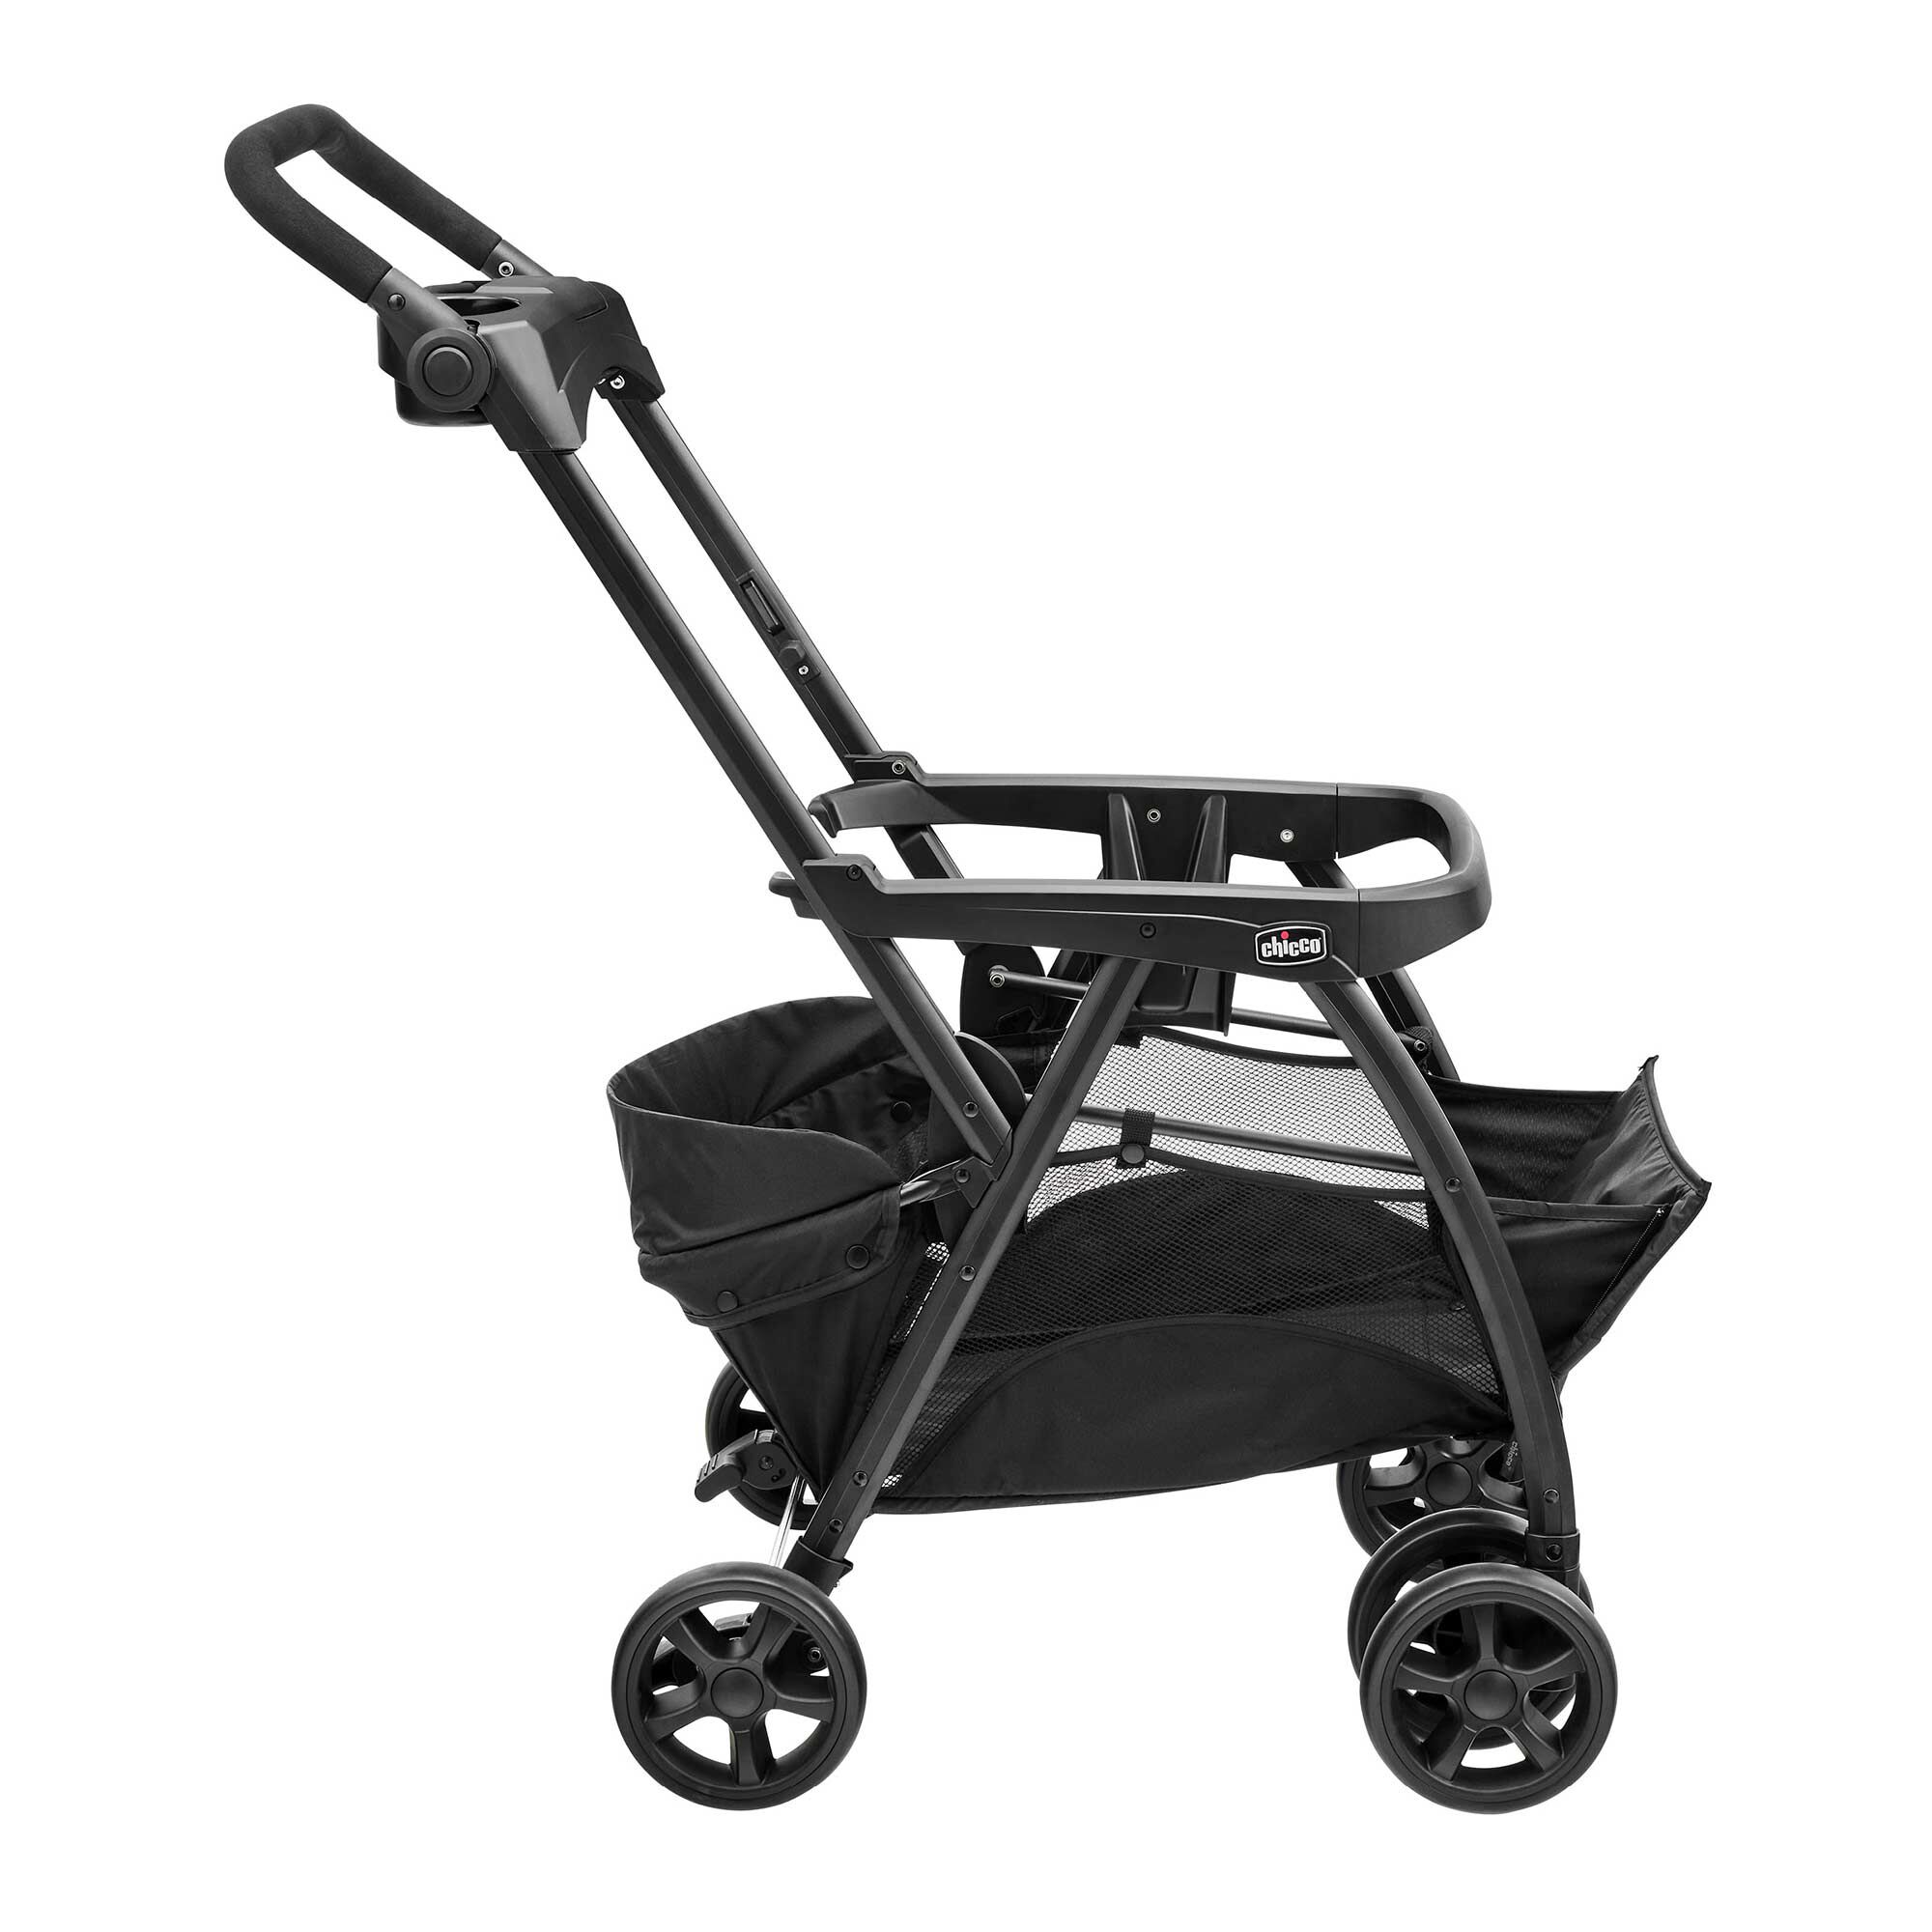 Porte Bebe Dorsal Caddy Chicco Significant Discount Save 64 Available Statehouse Gov Sl